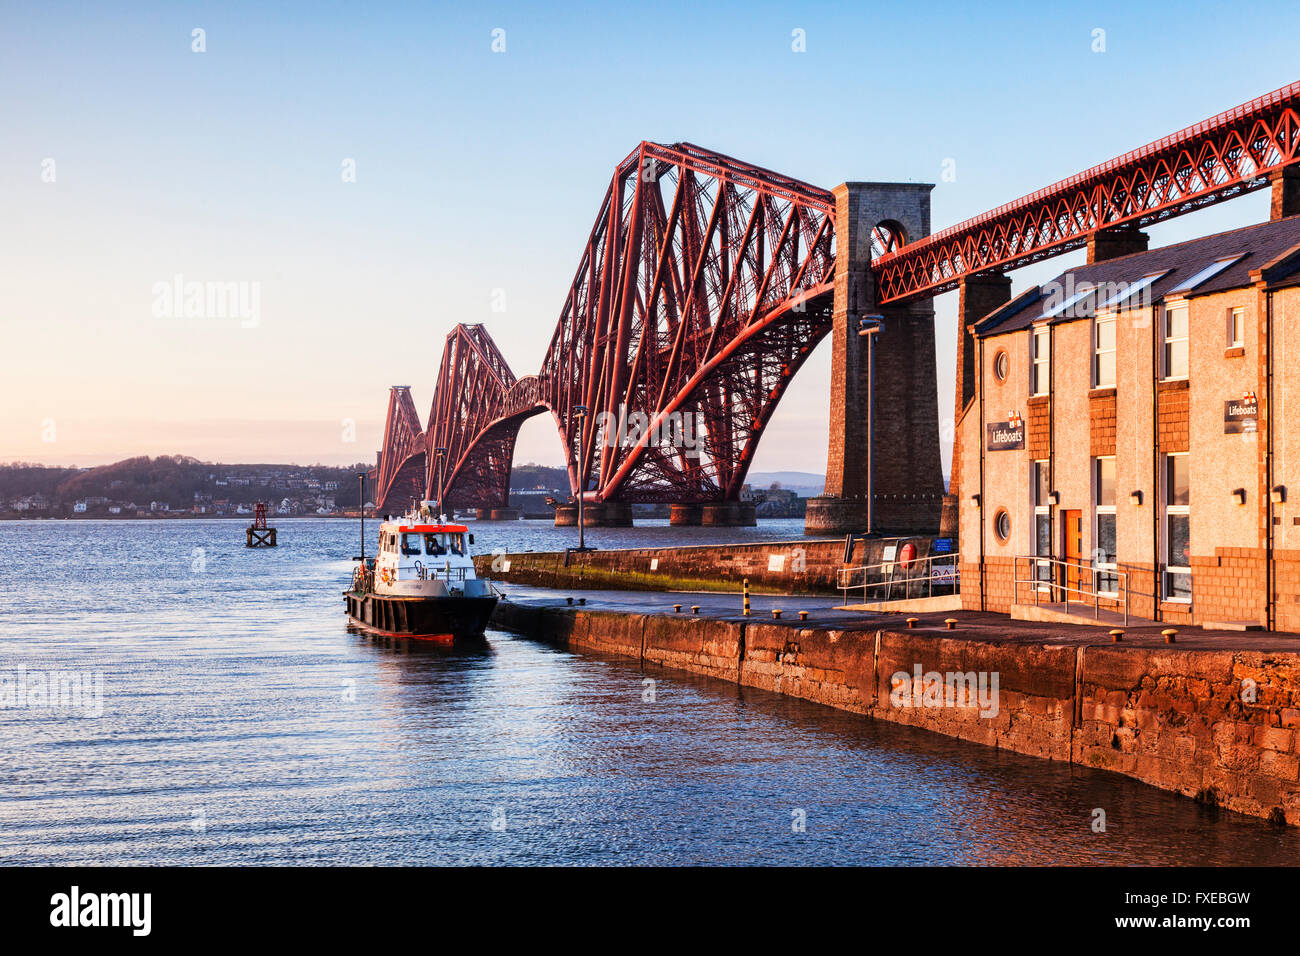 Forth Rail bridge, Queensferry, Edinburgh, East Lothian, Scotland, UK, one of the most famous bridges in the world and an icon o Stock Photo